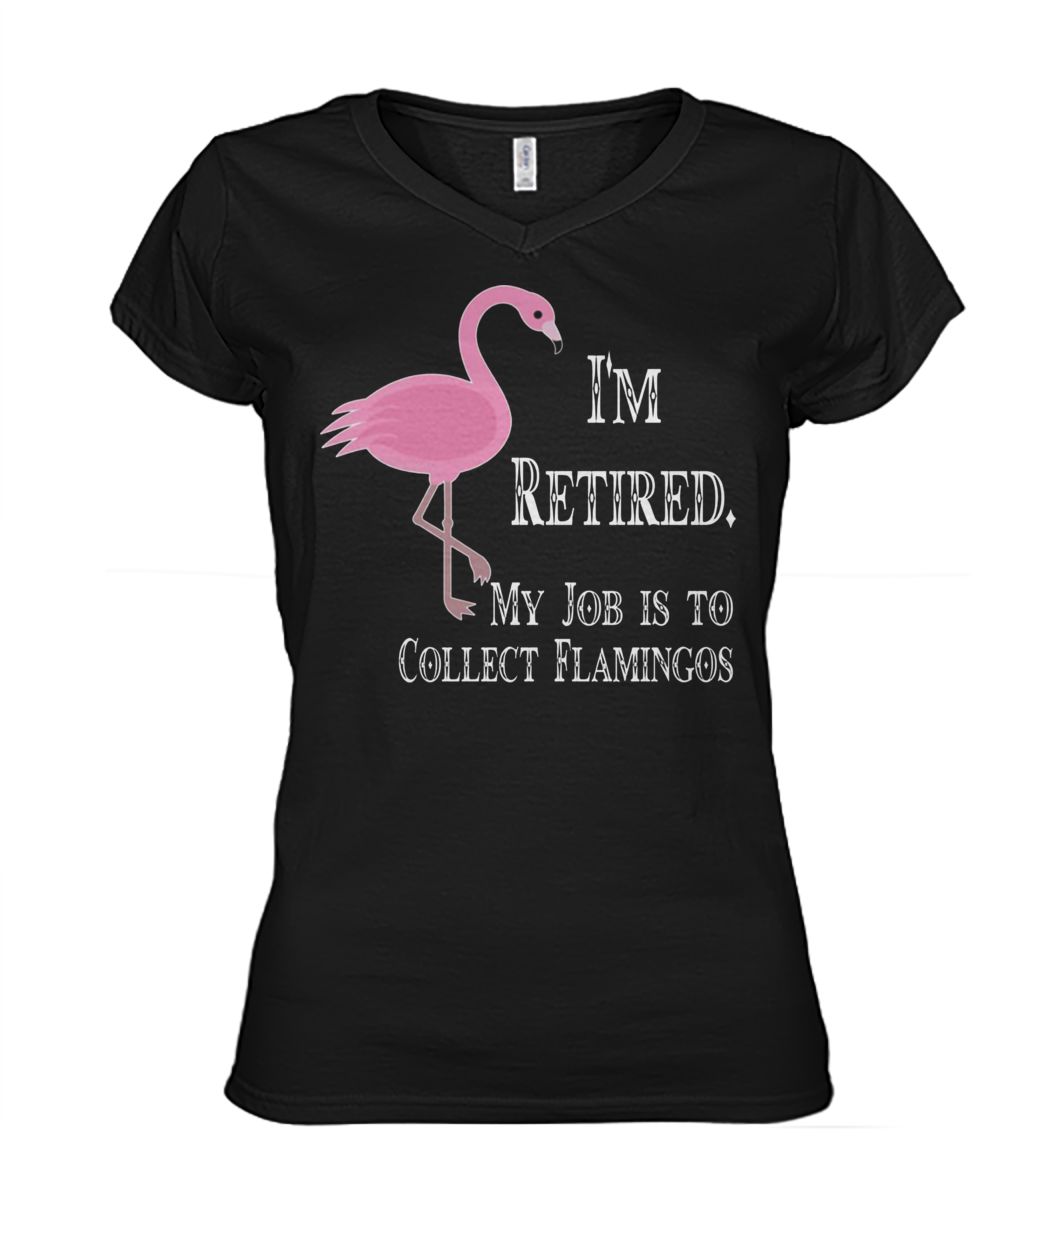 I'm retired my job is to collect flamingos women's v-neck